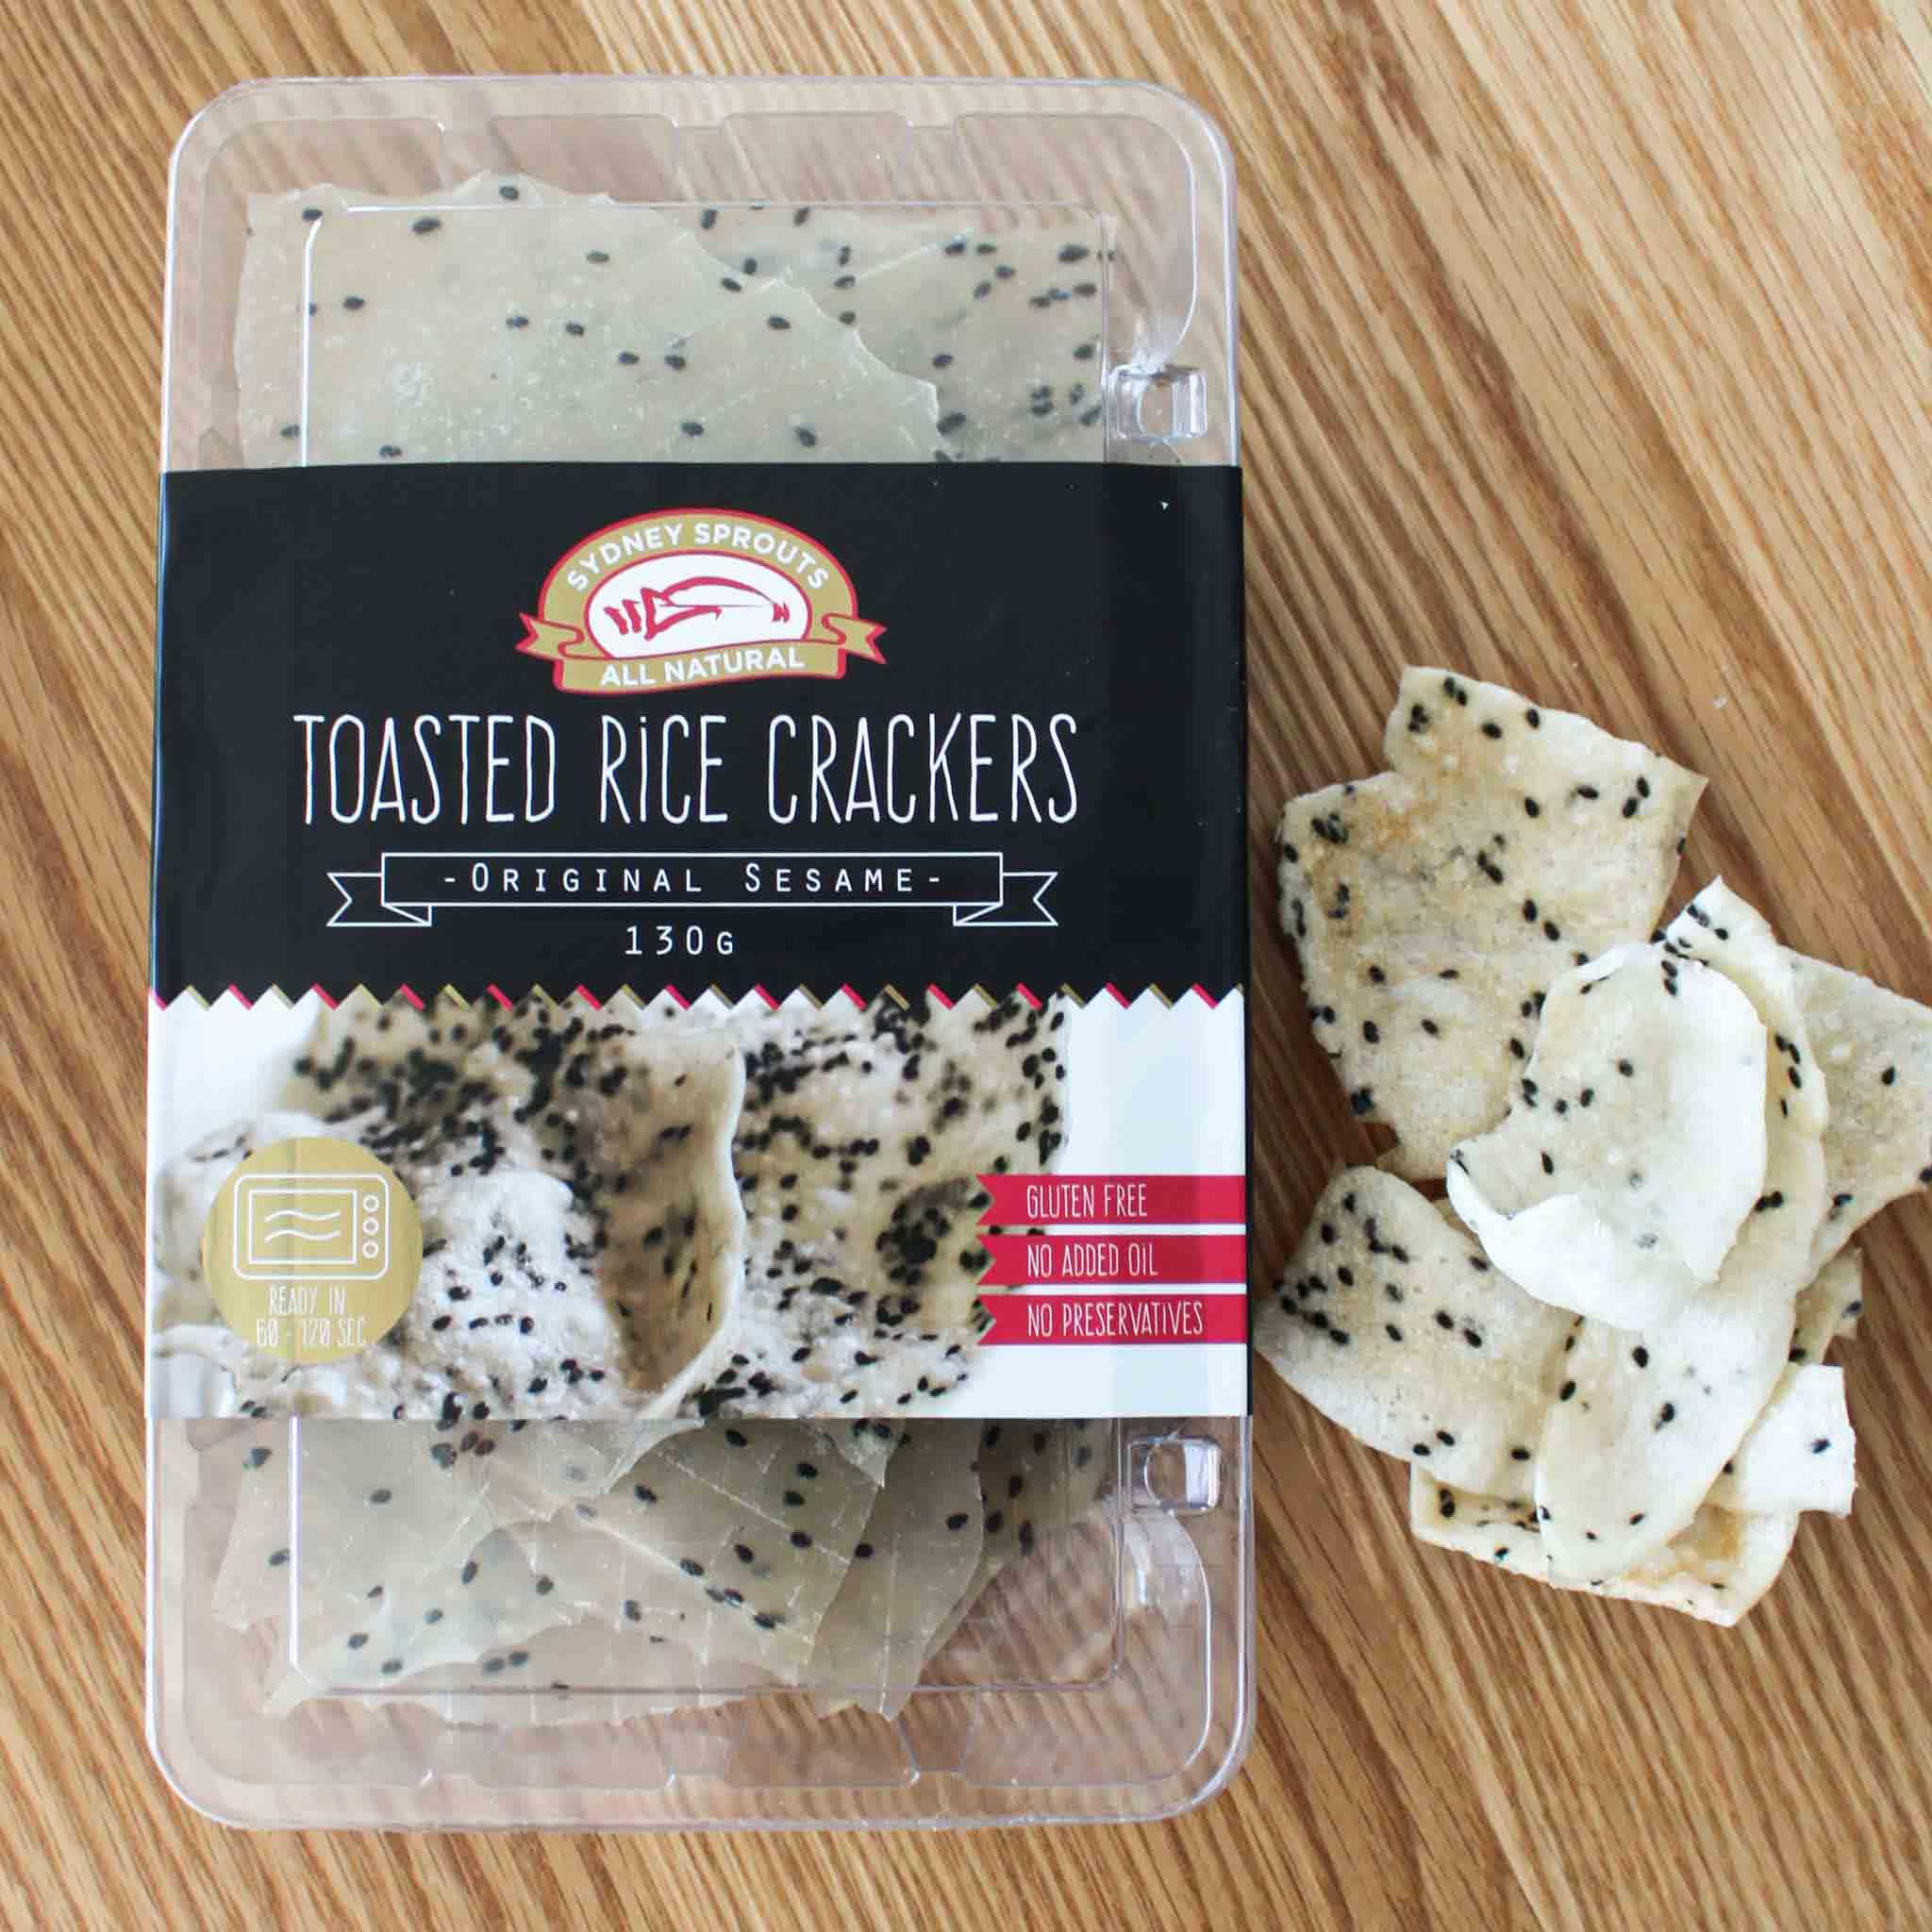 Toasted rice crackers - Sydney Sprouts